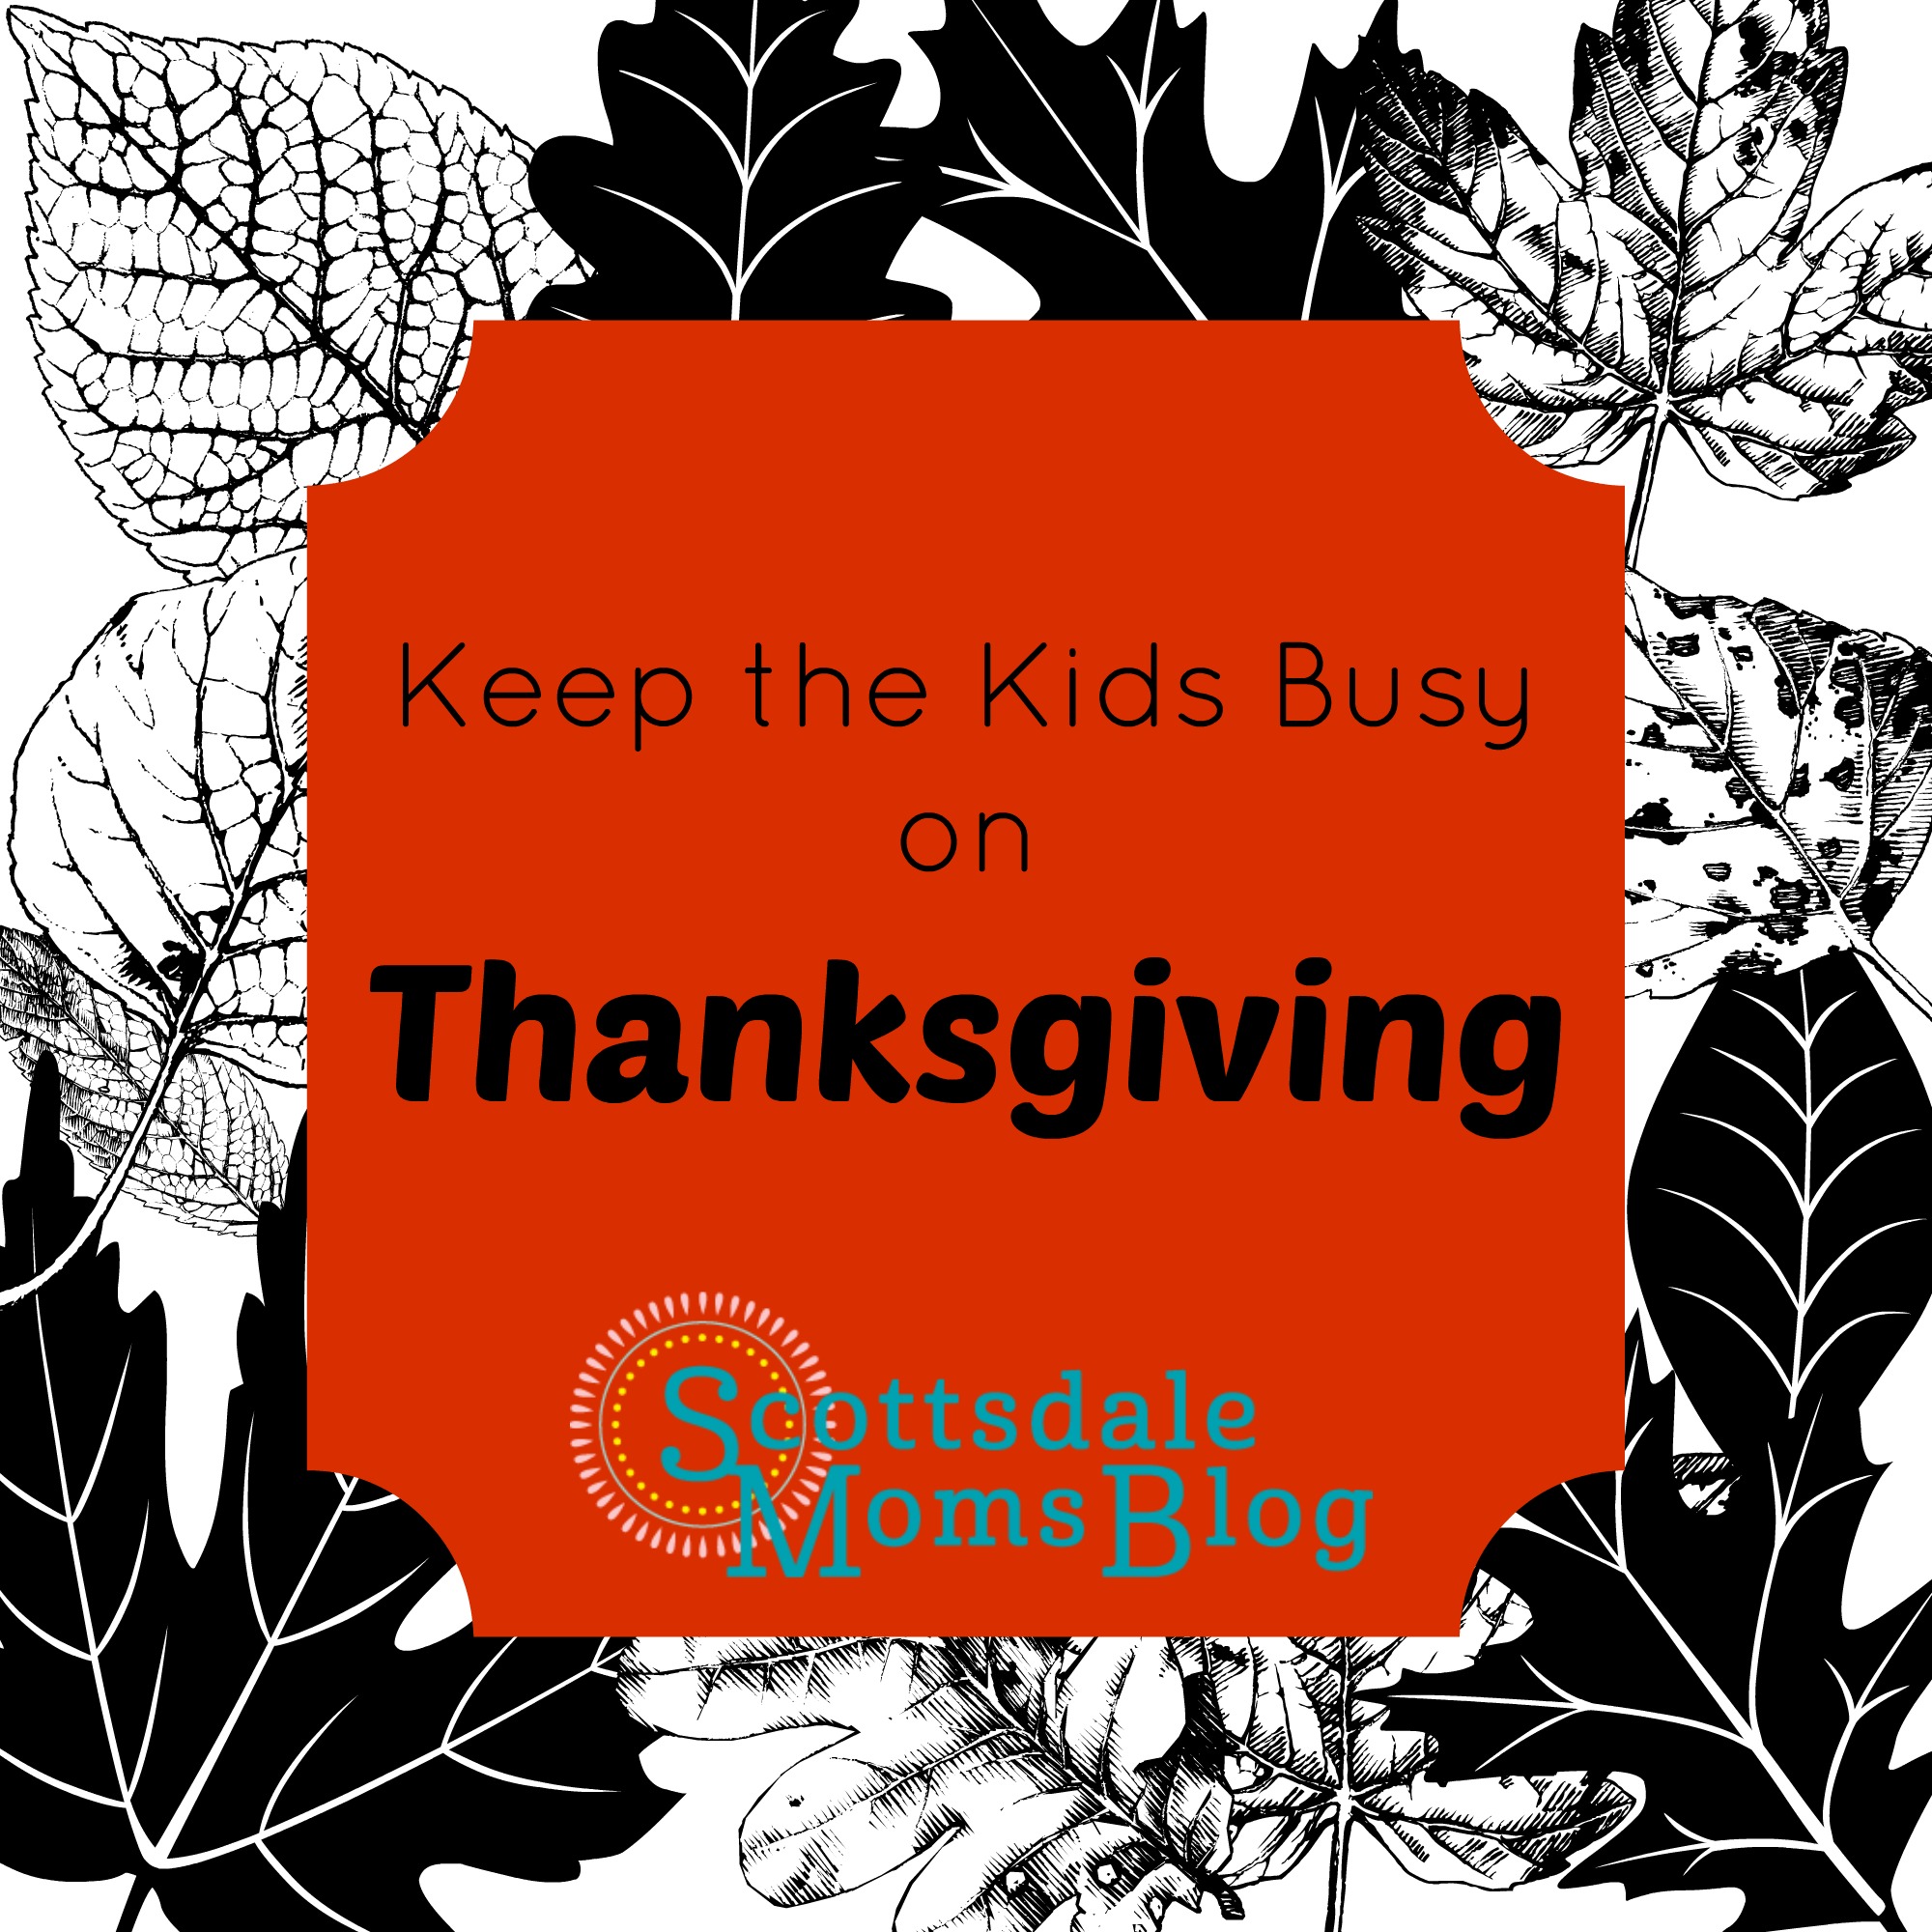 Activities to Keep the Kids Busy this Thanksgiving